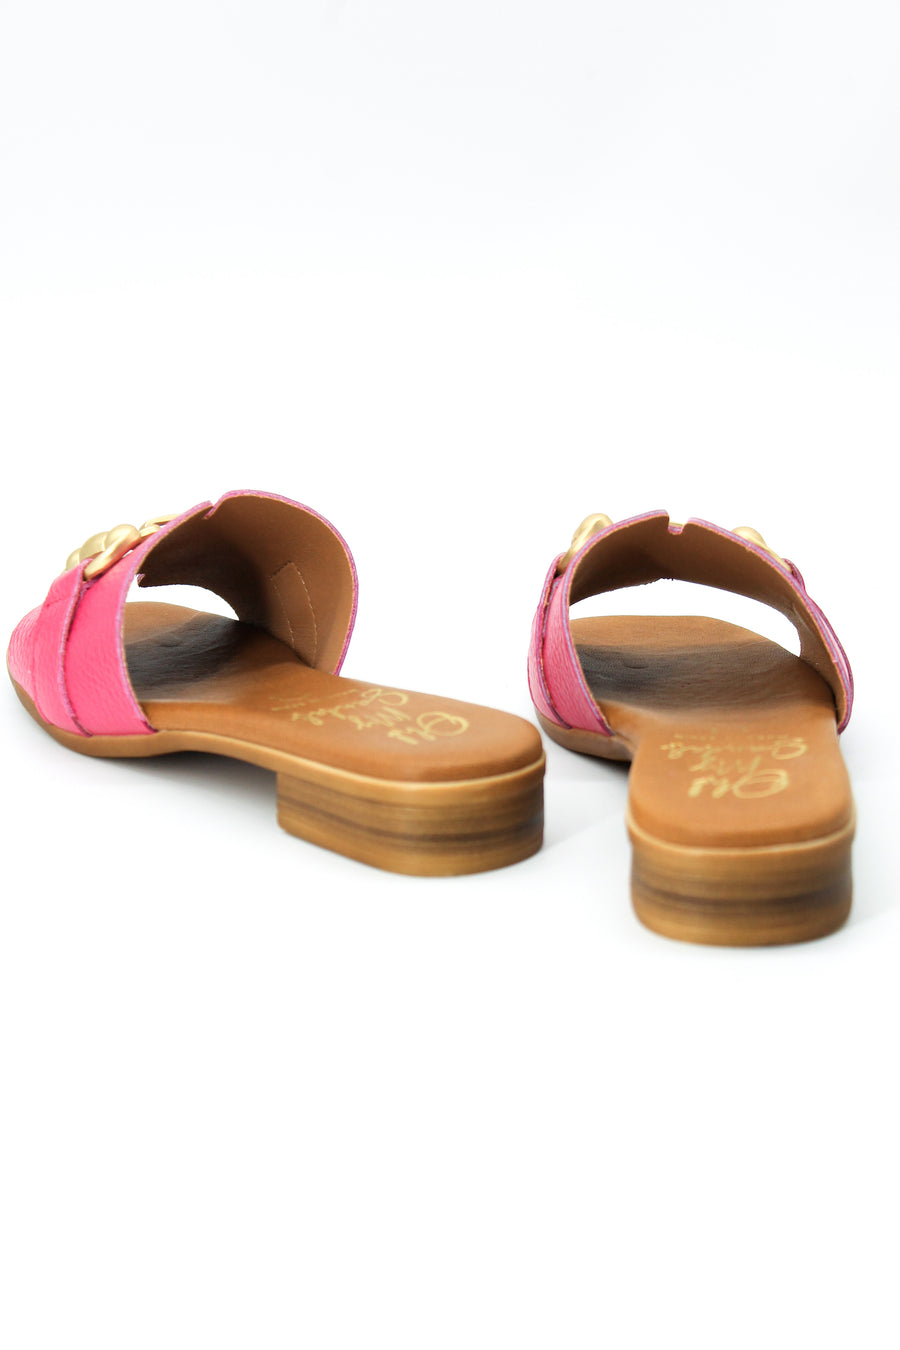 Oh My Sandals 5164 Pink